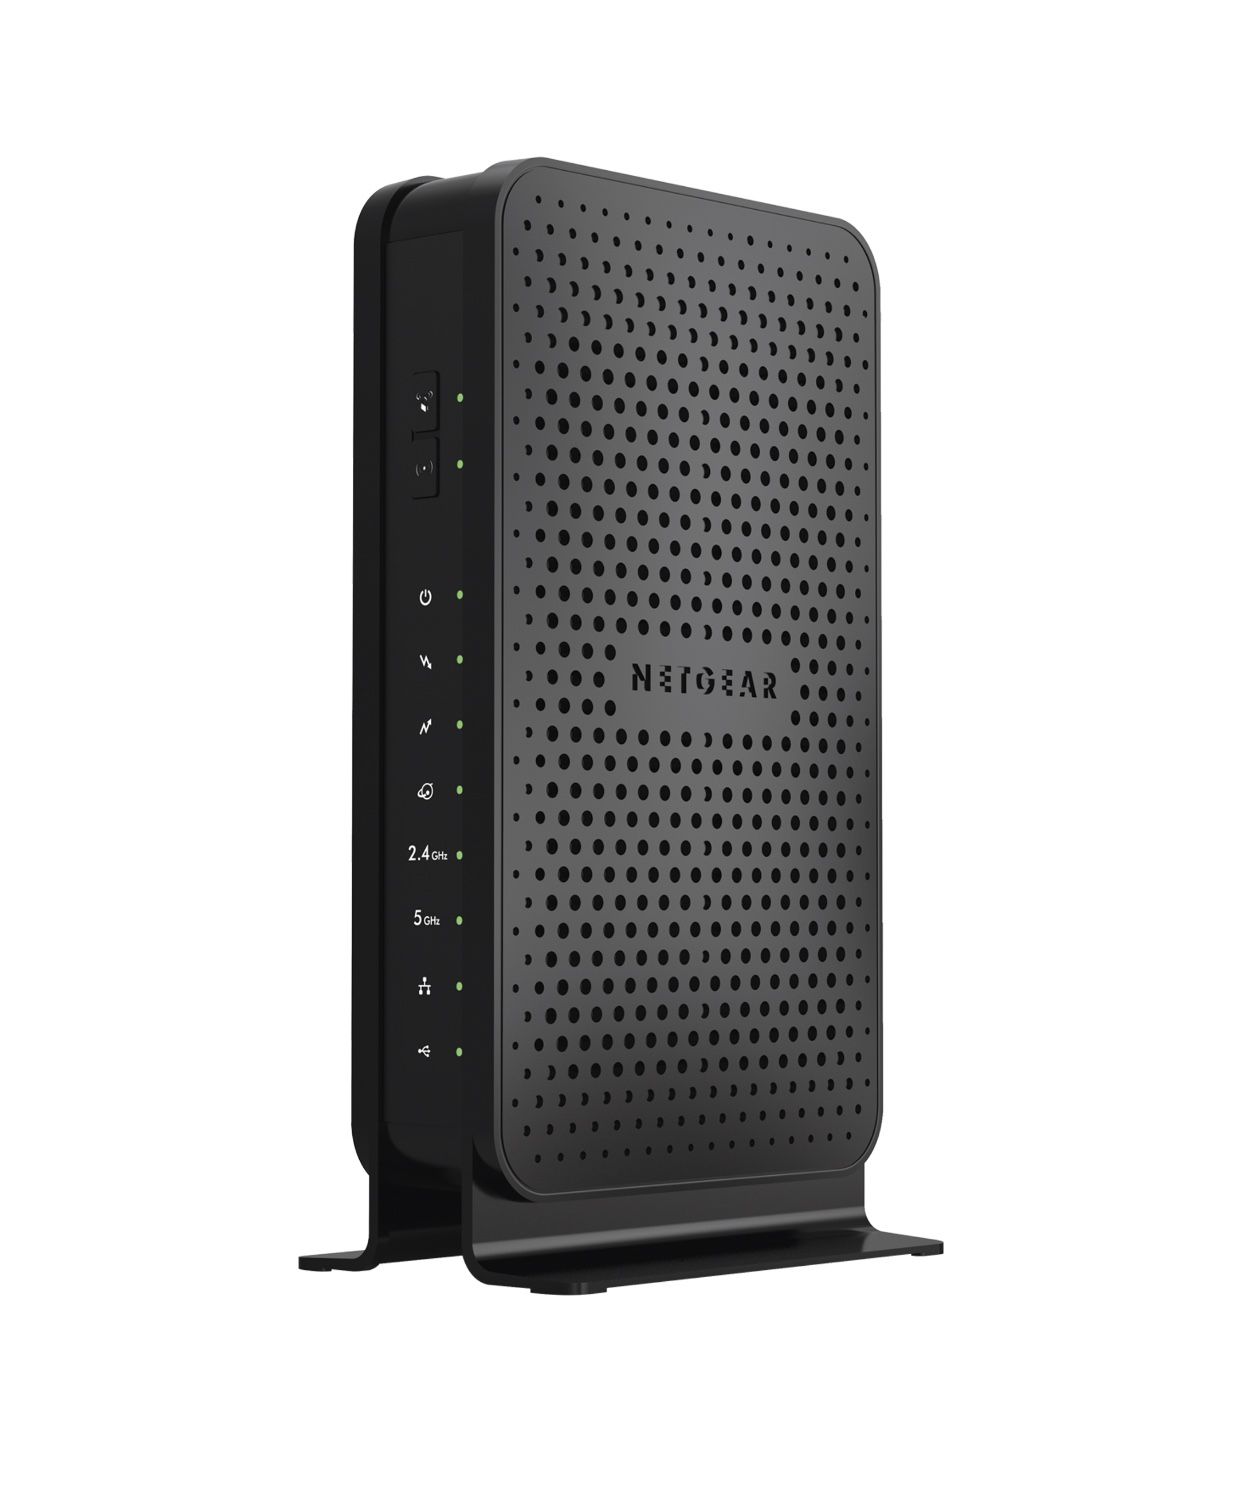 NETGEAR N600 (8x4) WiFi Cable Modem Router Combo C3700, DOCSIS 3.0 | Certified for XFINITY by Comcast, Spectrum, Cox, and more (C3700-100NAS)